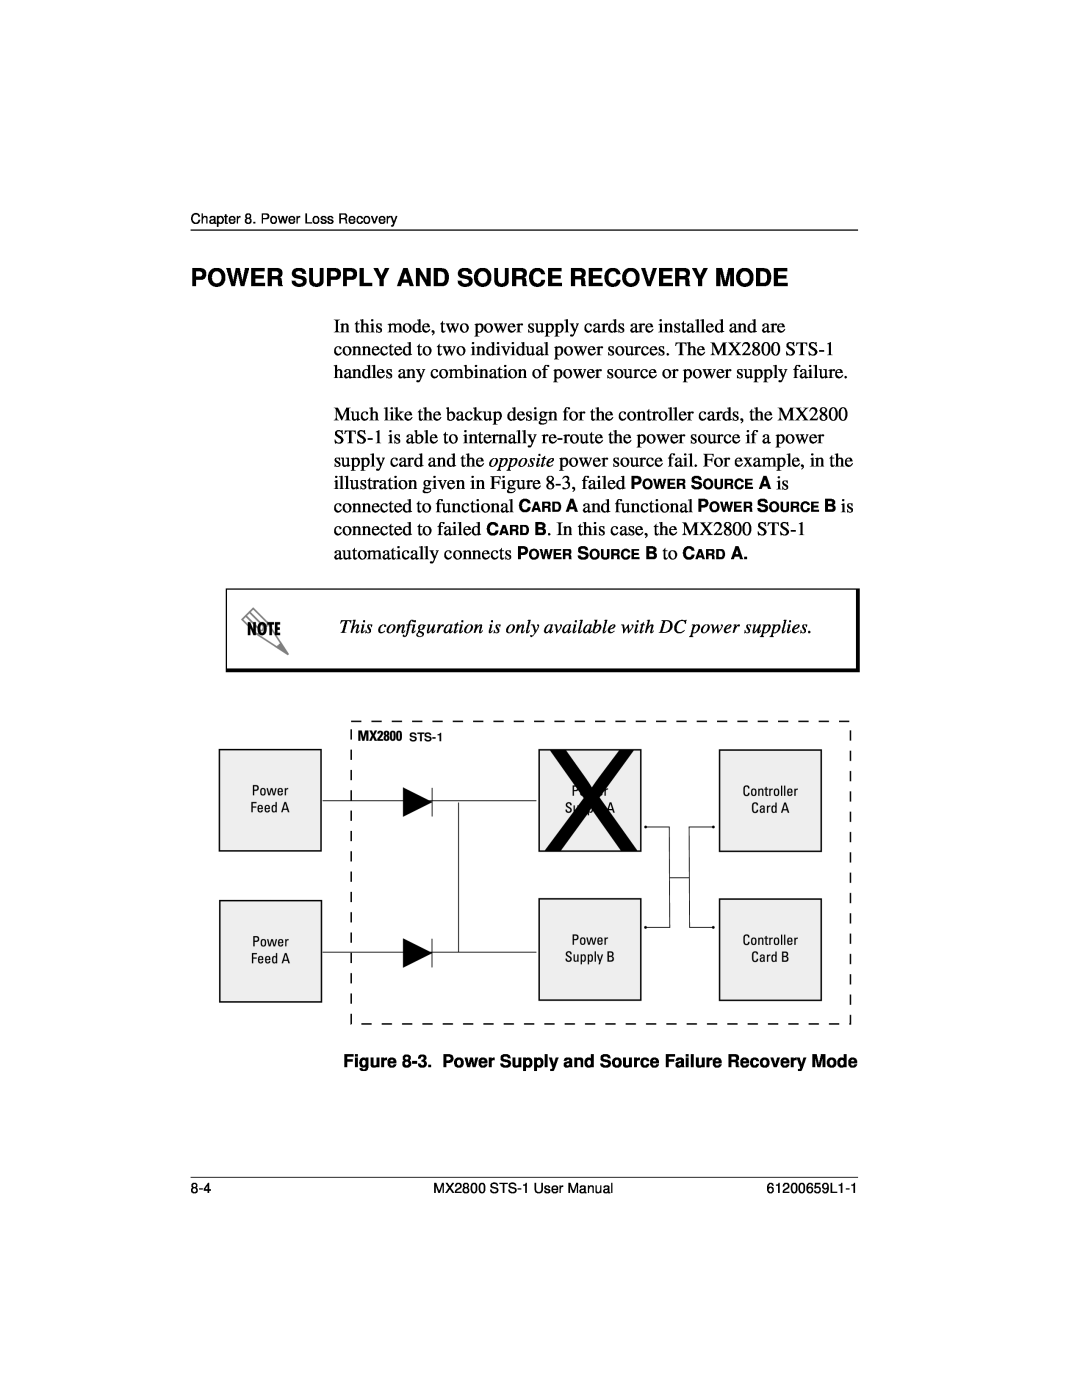 ADTRAN 4200659L1 Power Supply And Source Recovery Mode, This configuration is only available with DC power supplies 